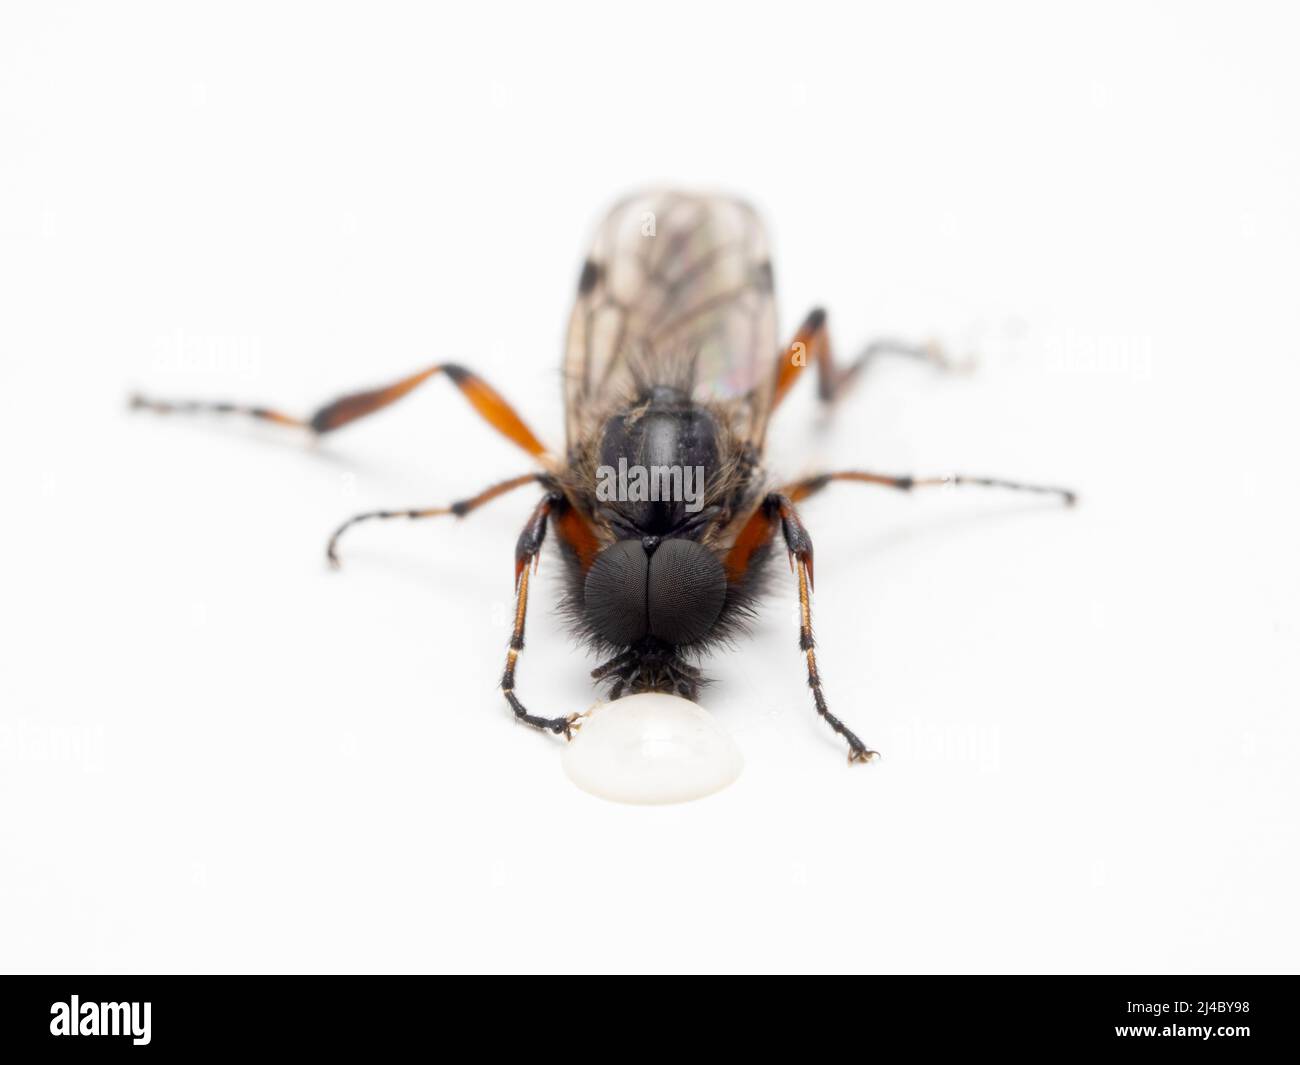 Close-up of a colorful March fly (Bibio vestitus) with huge eyes, drinking from a drop of honey. Isolated Stock Photo